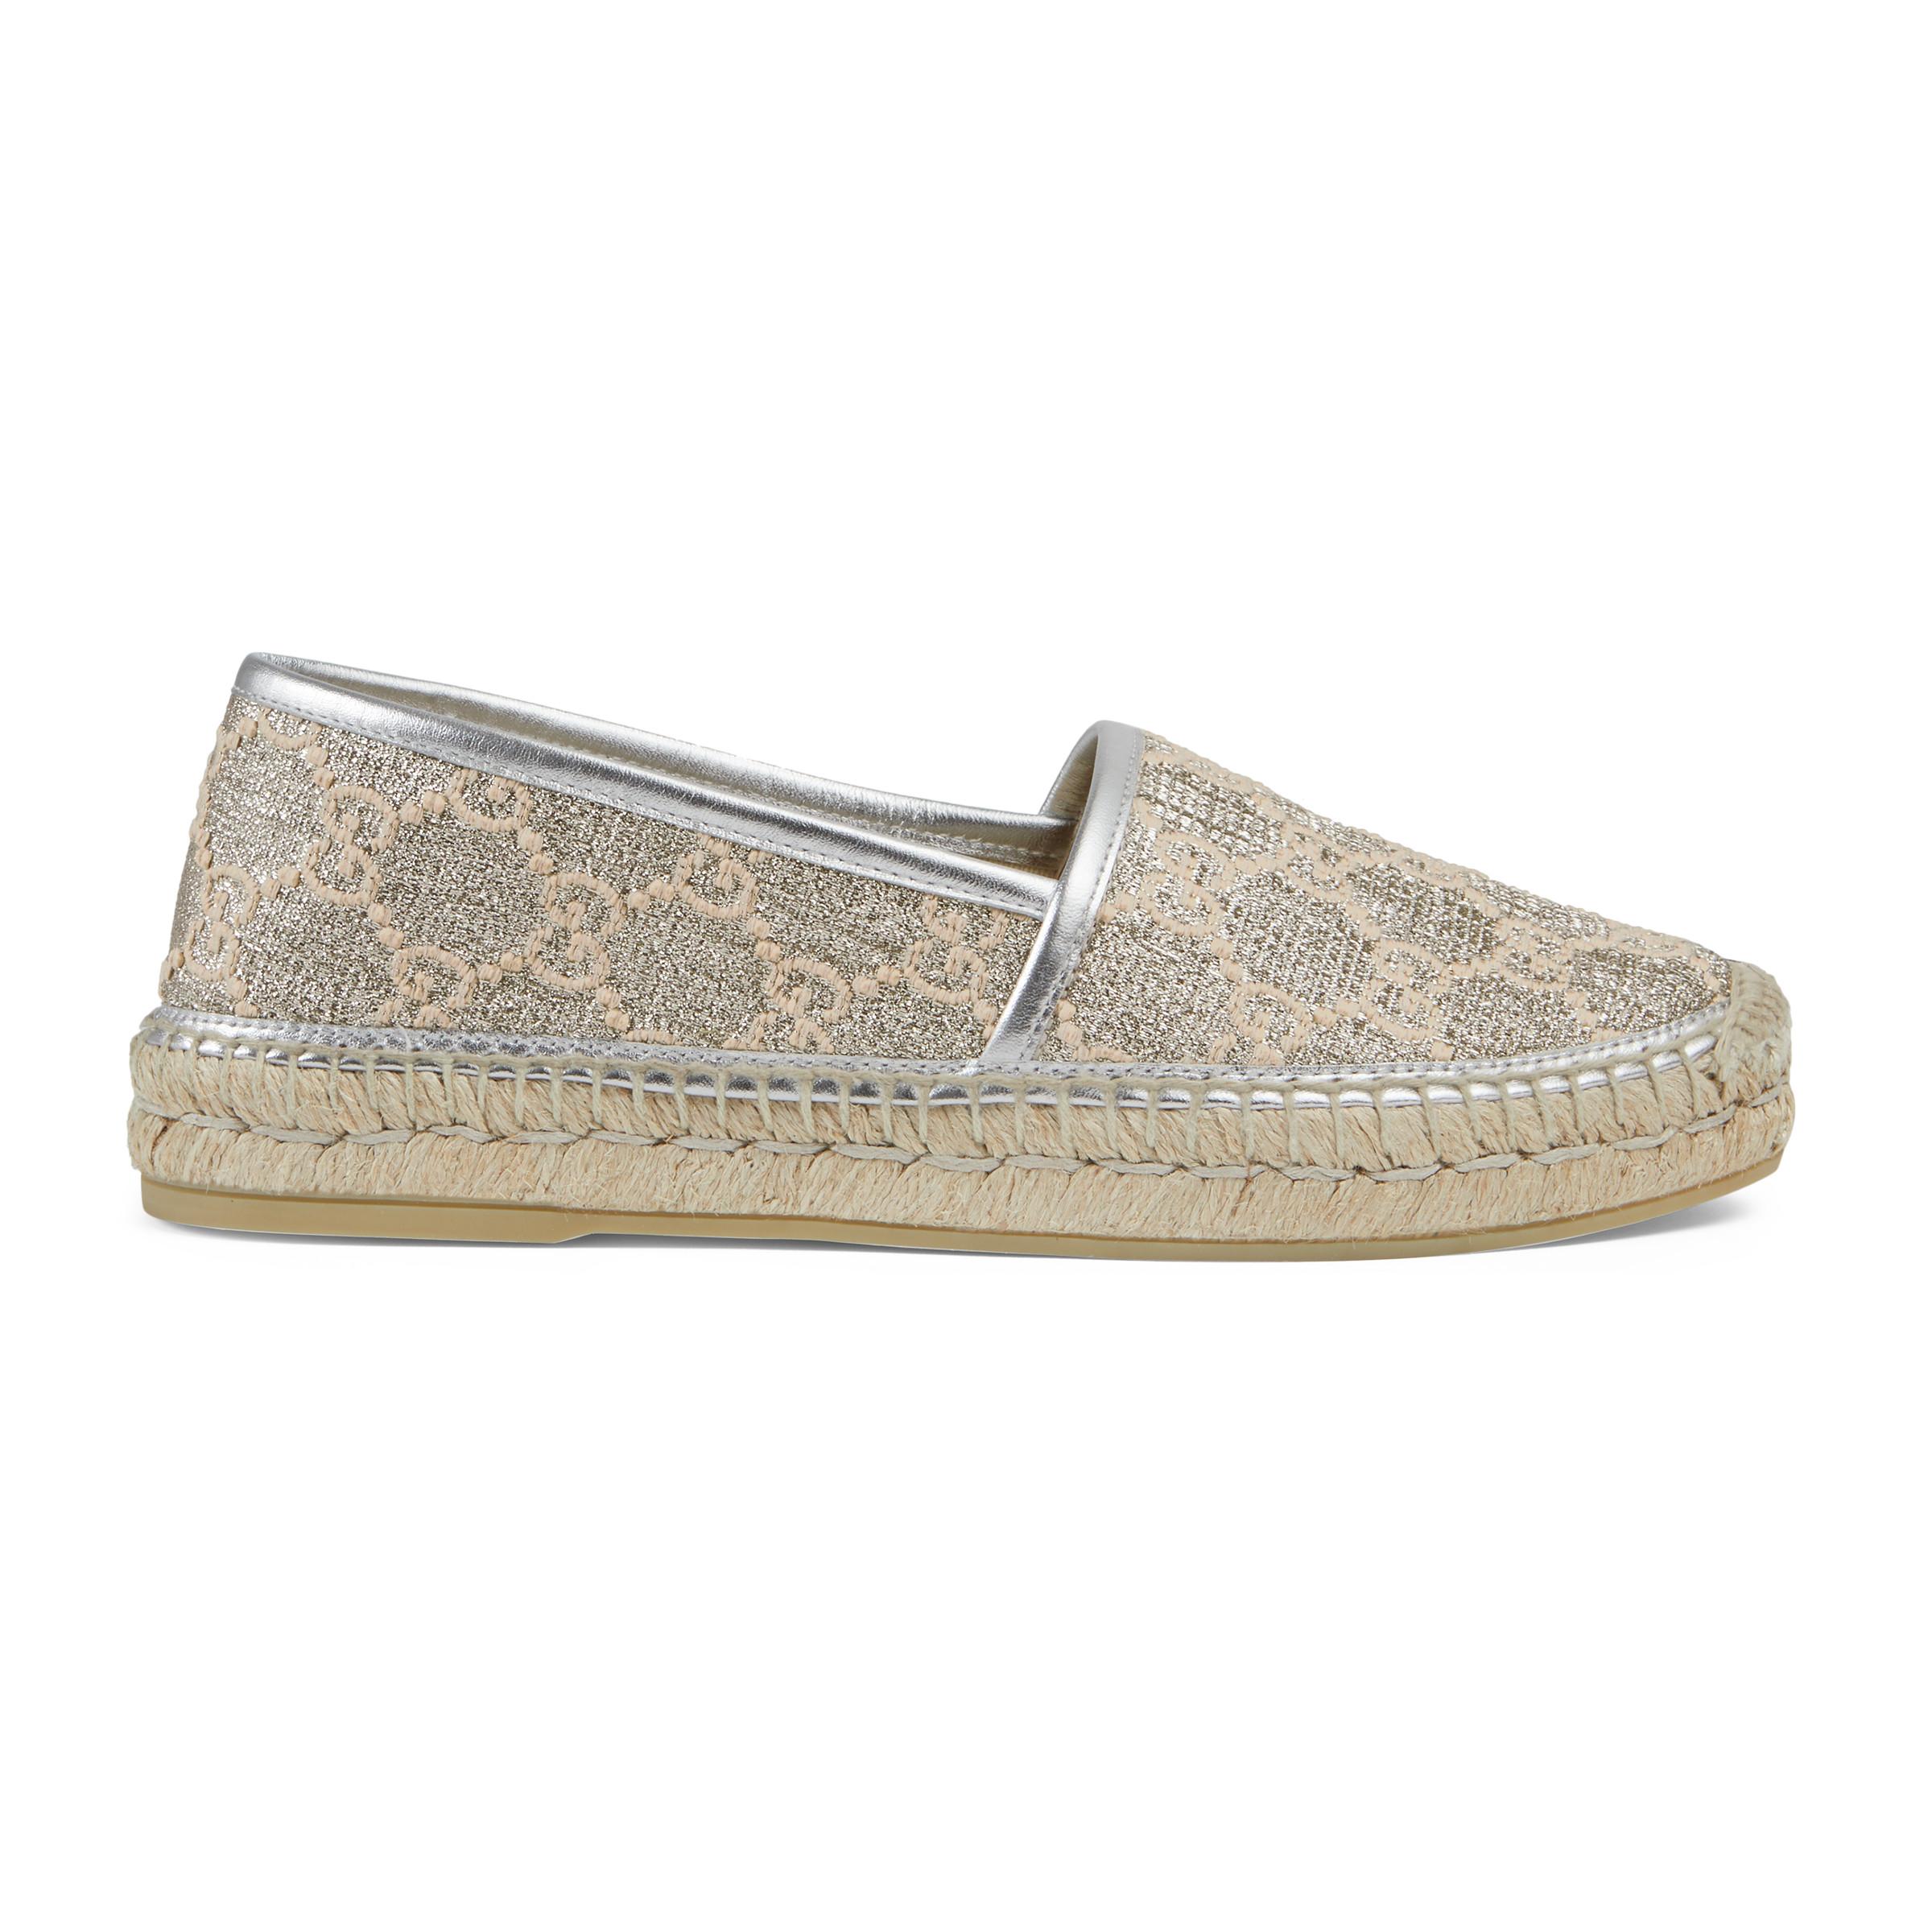 Gucci Rubber Heritage GG Lamé Espadrilles in Silver (Metallic) - Save 5 ...